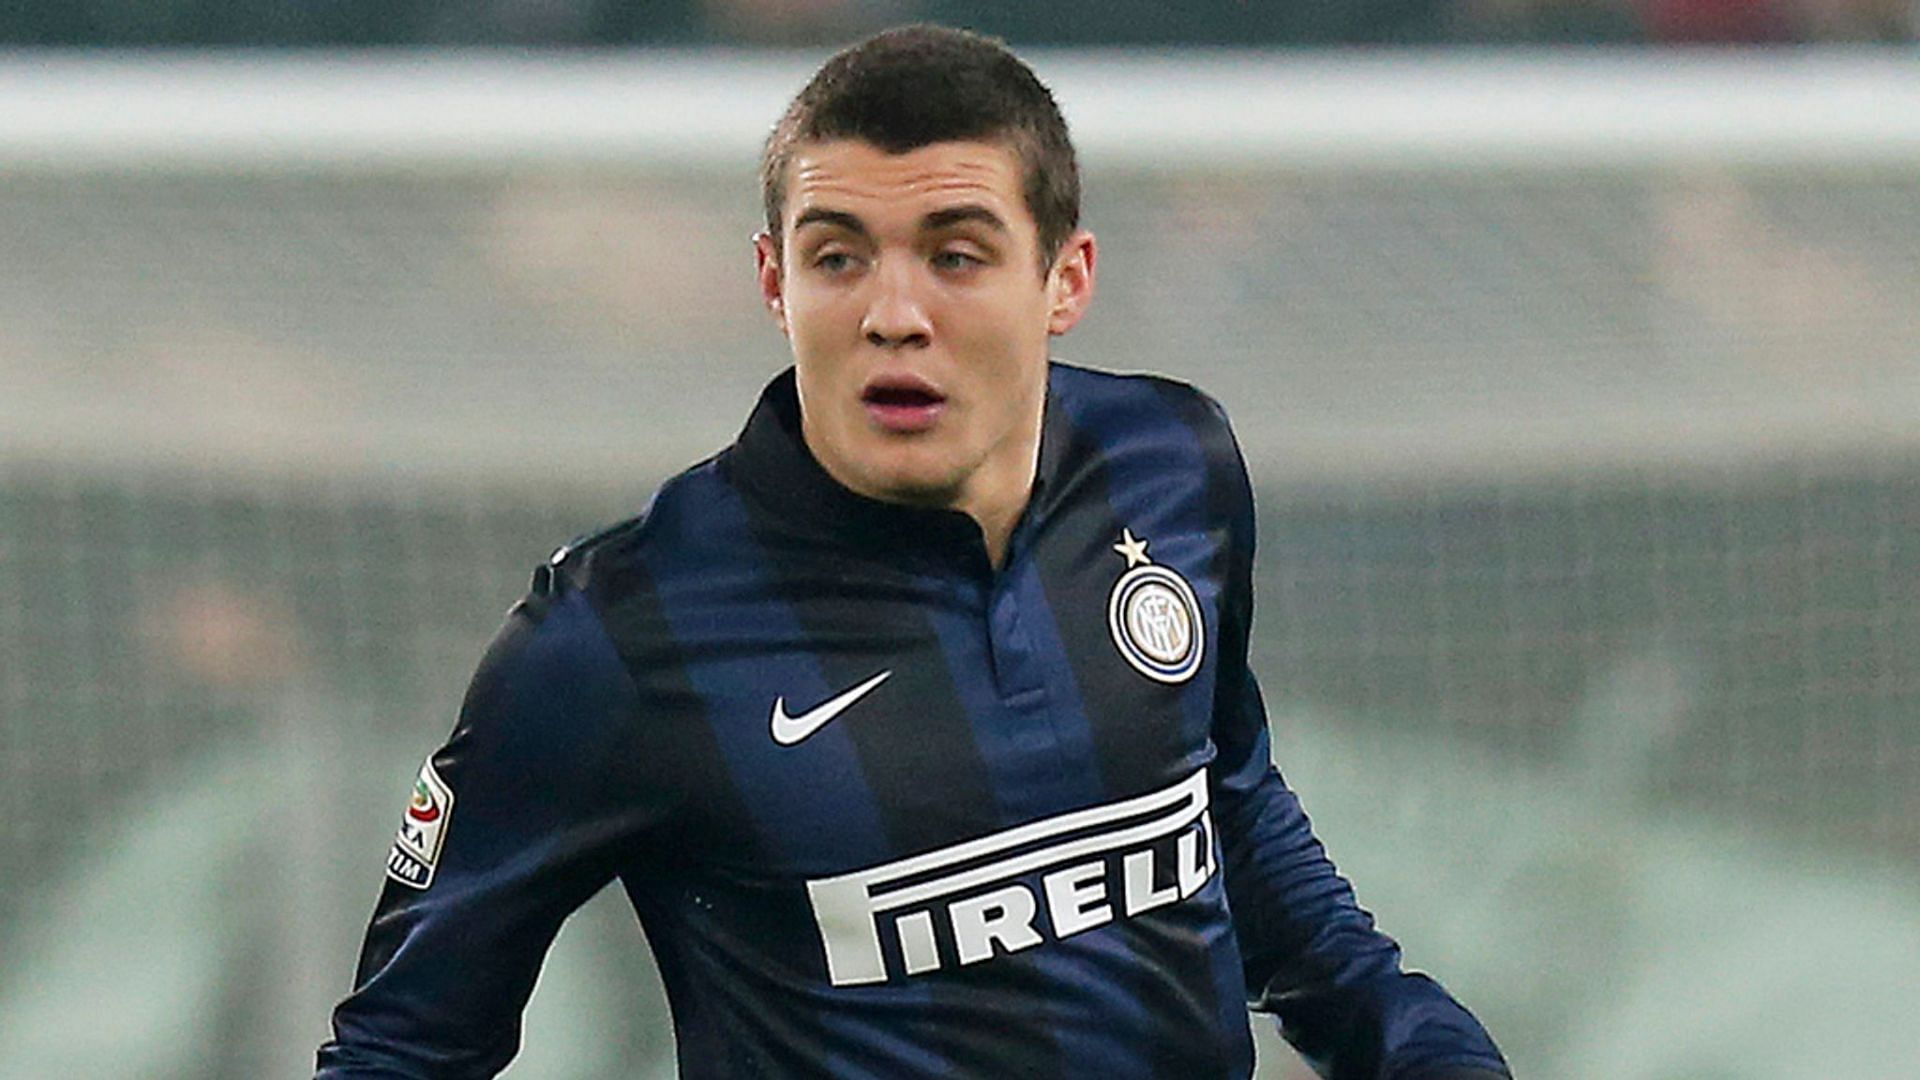 Kovacic was sold due to financial problems (Image via BBC).